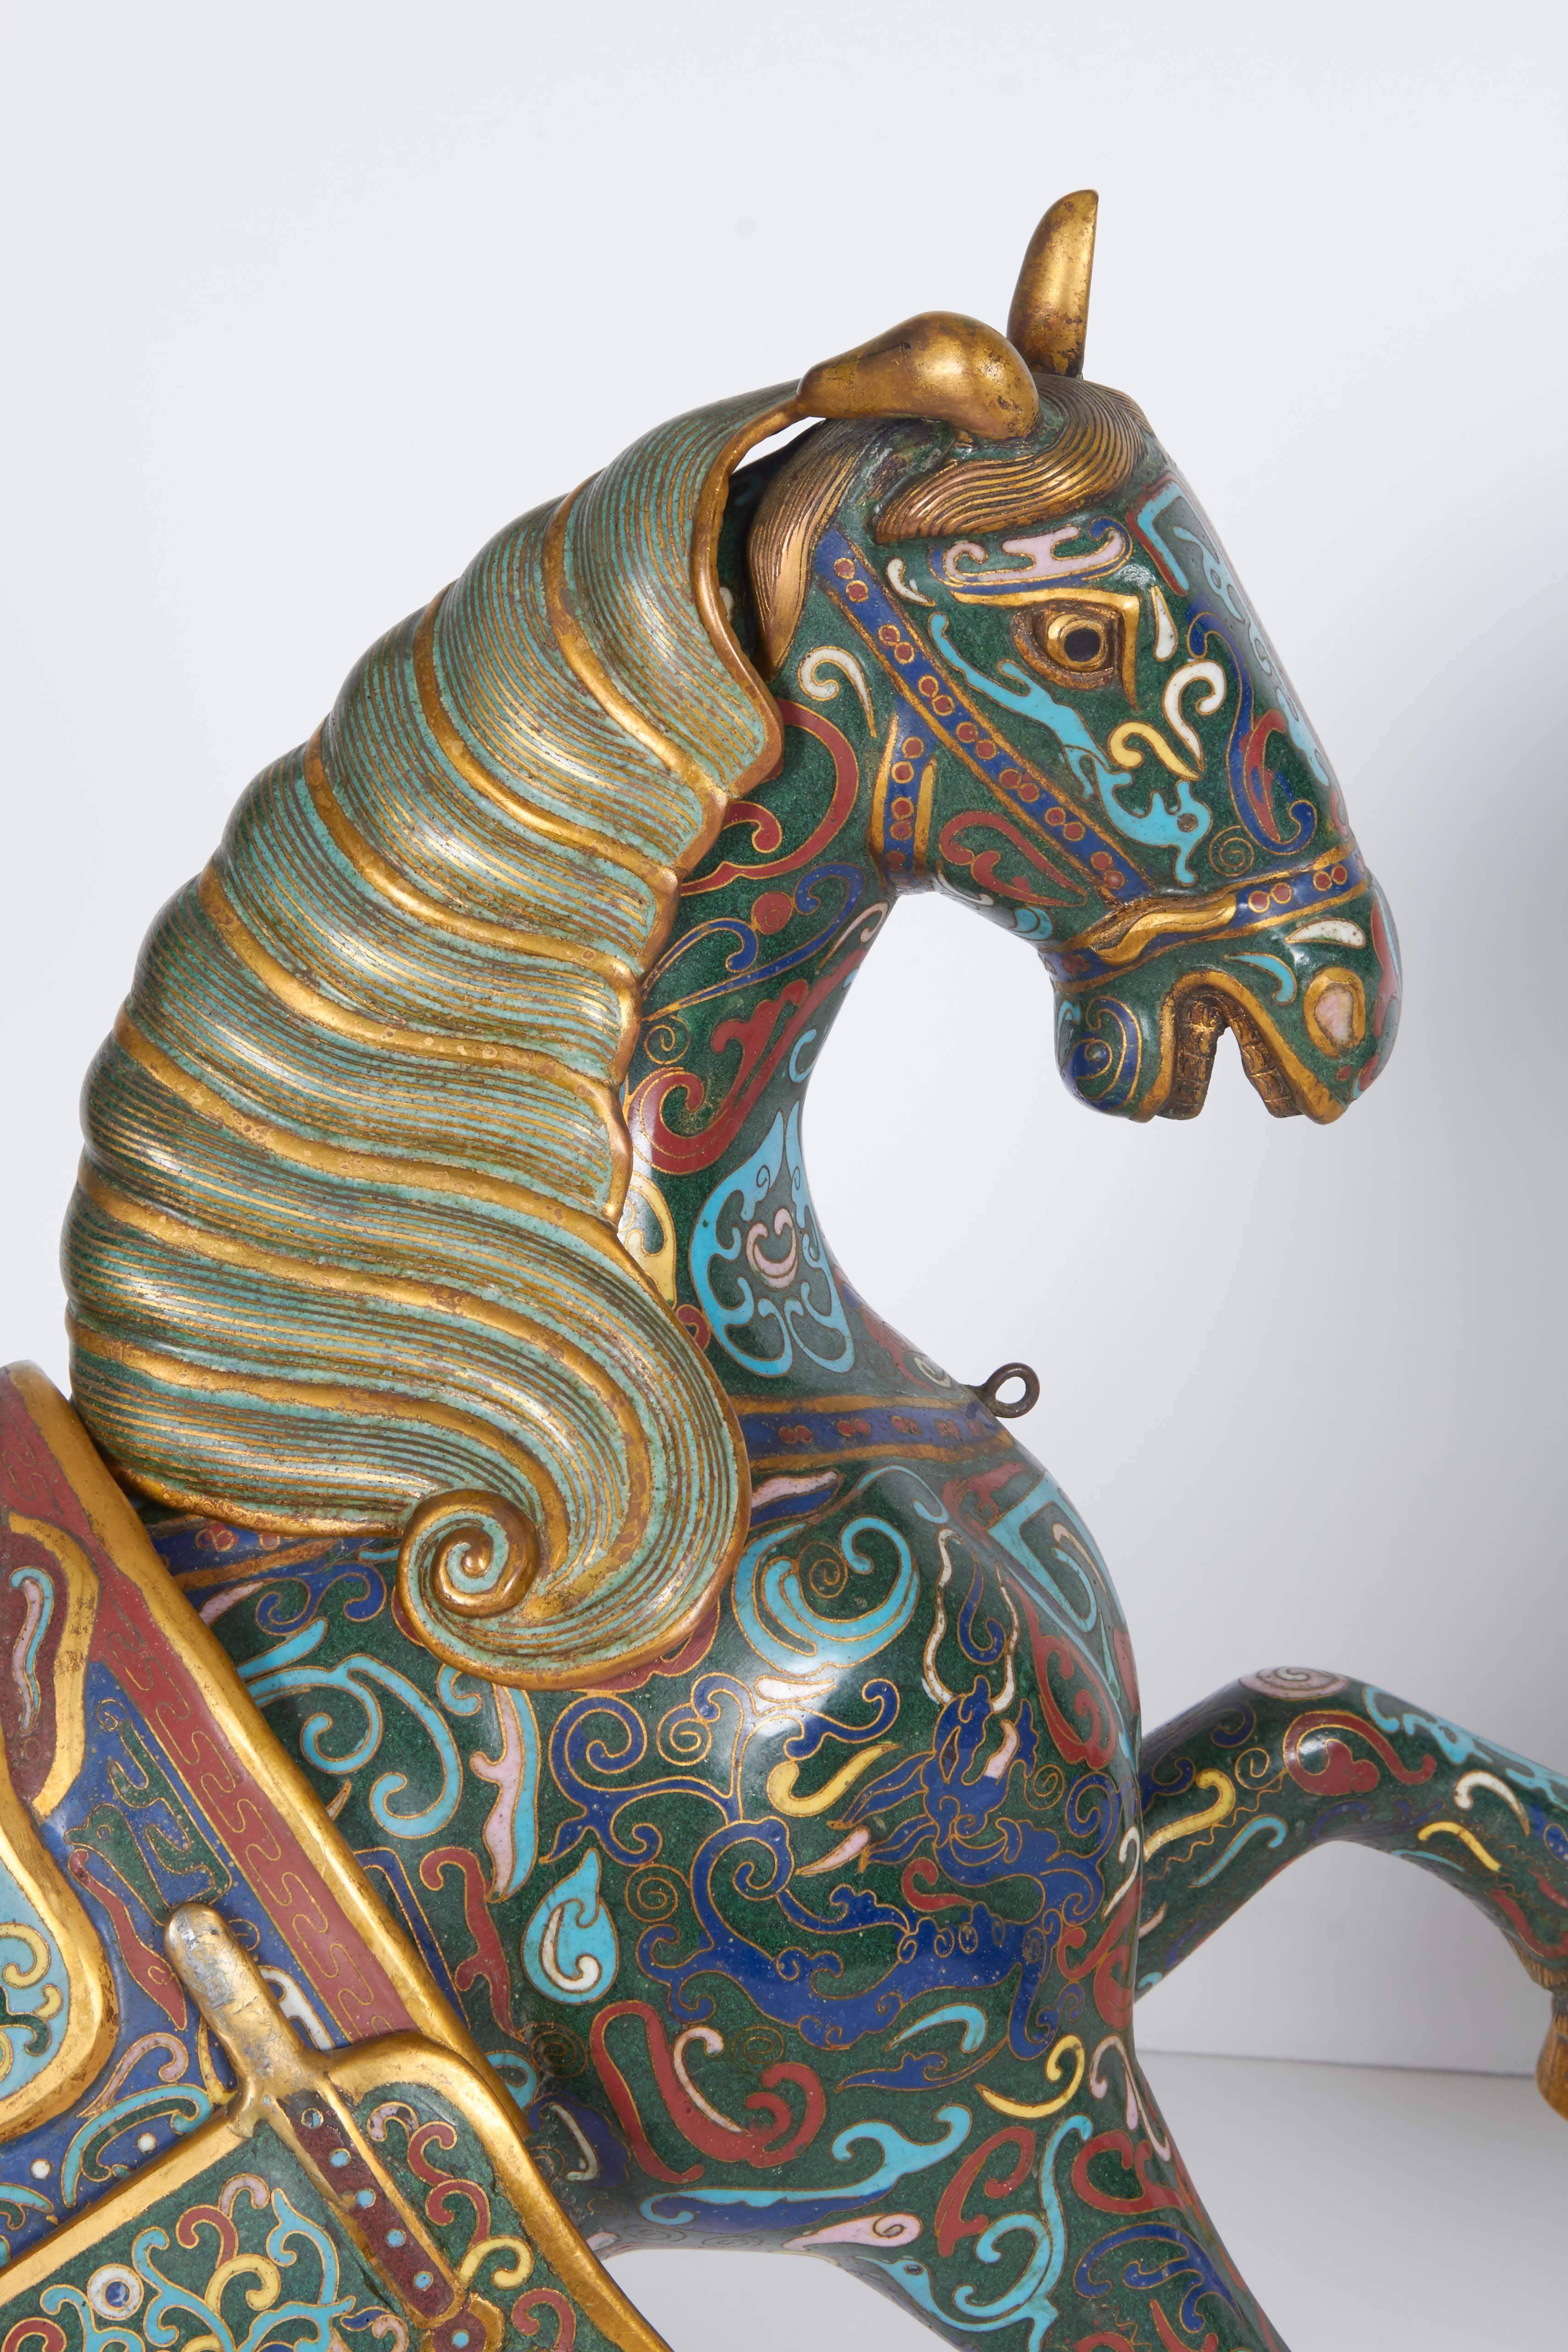 Pair of Chinese Cloisonné enamel green horses or zebras.

Archaistic style.

Very good quality.

Early 20th century.

